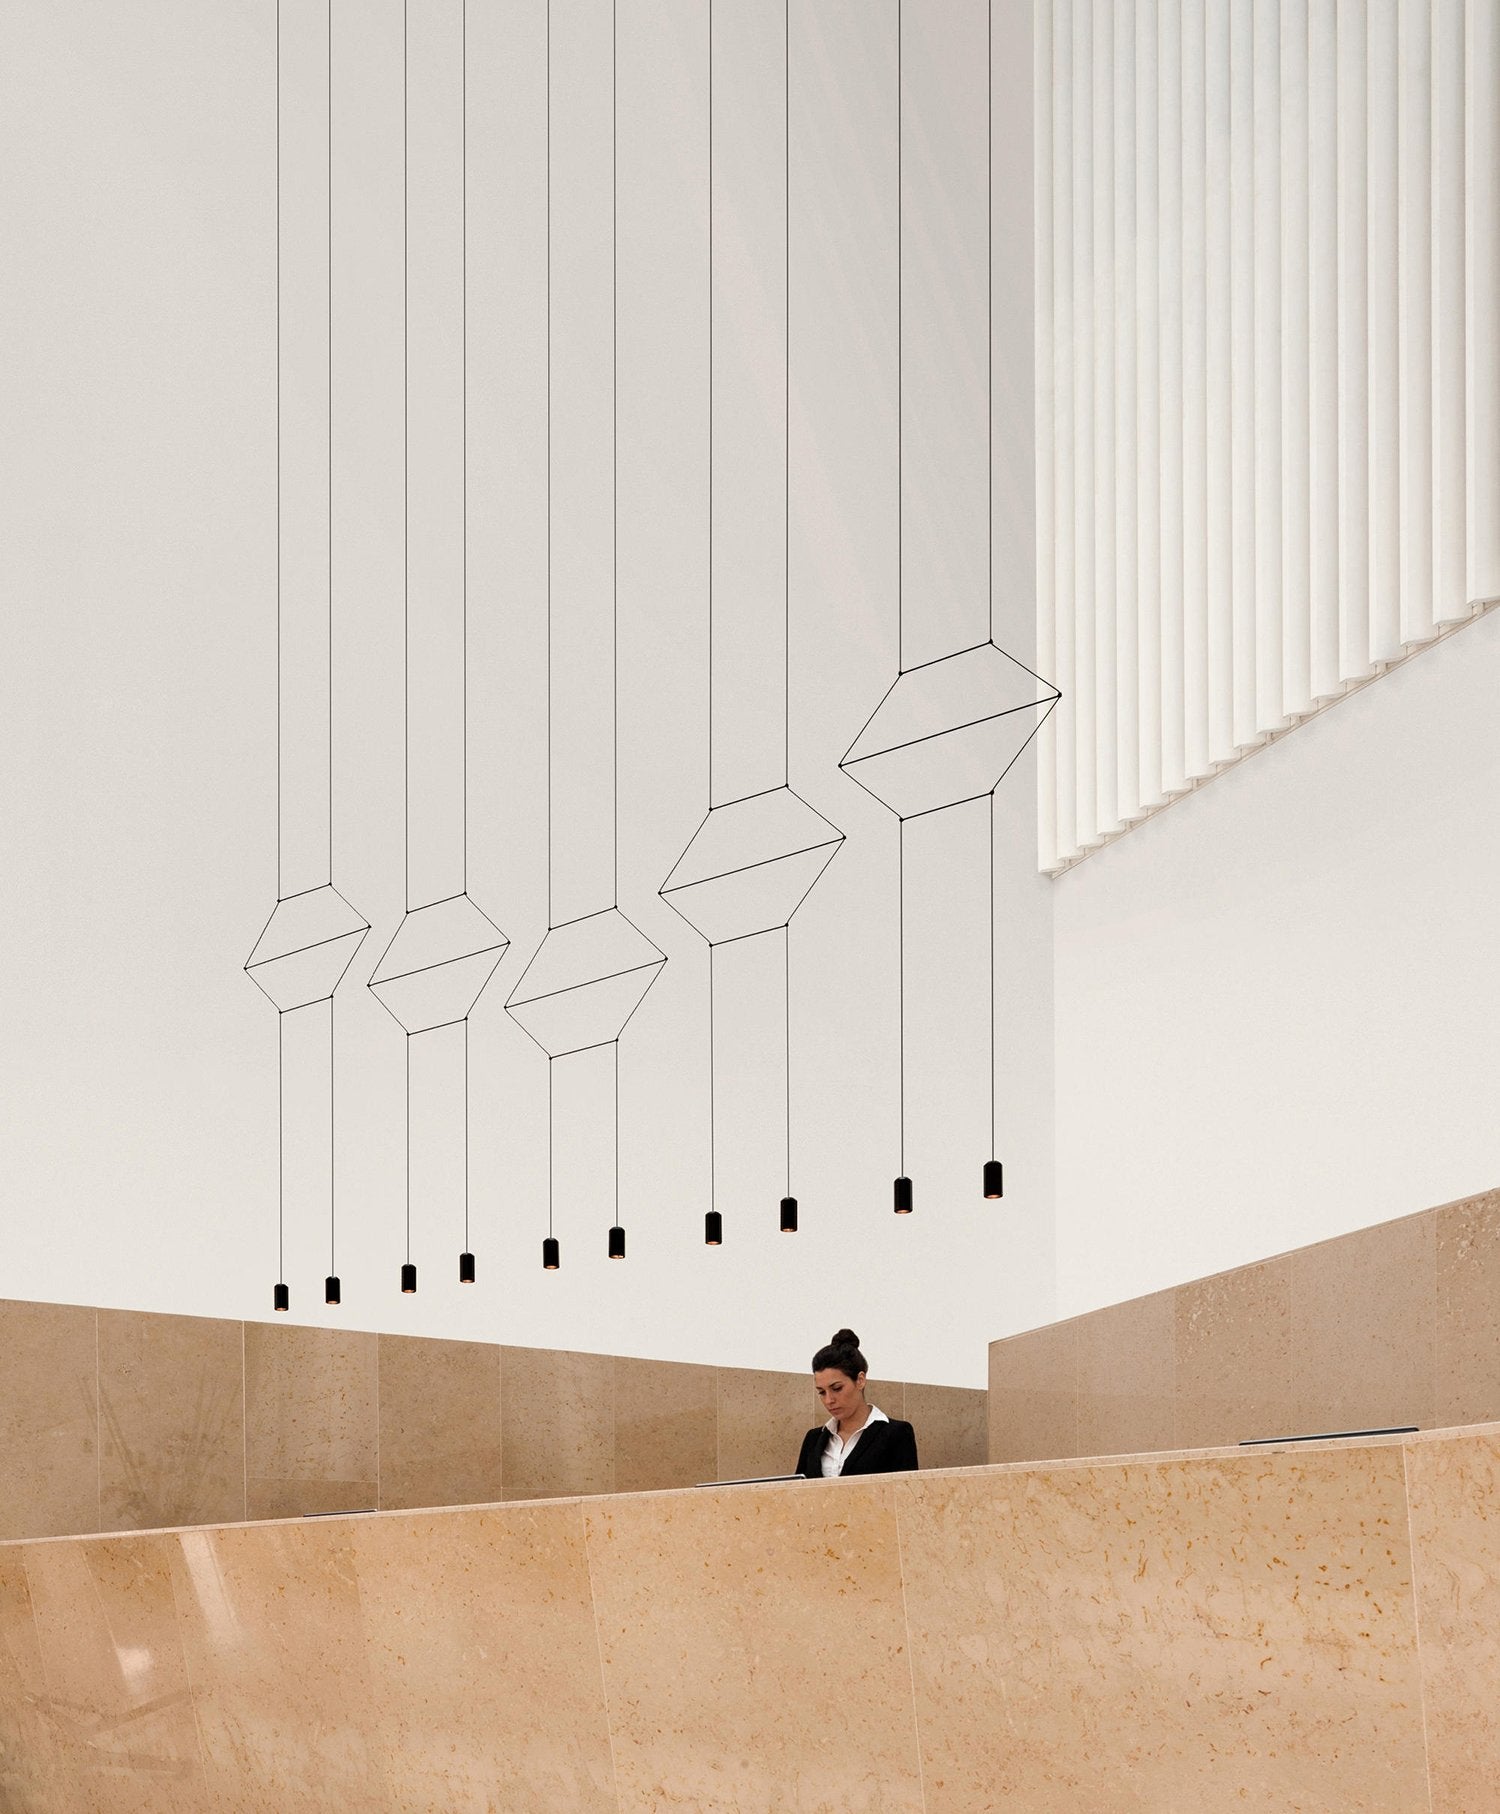 Lines 2D Hanging lamps